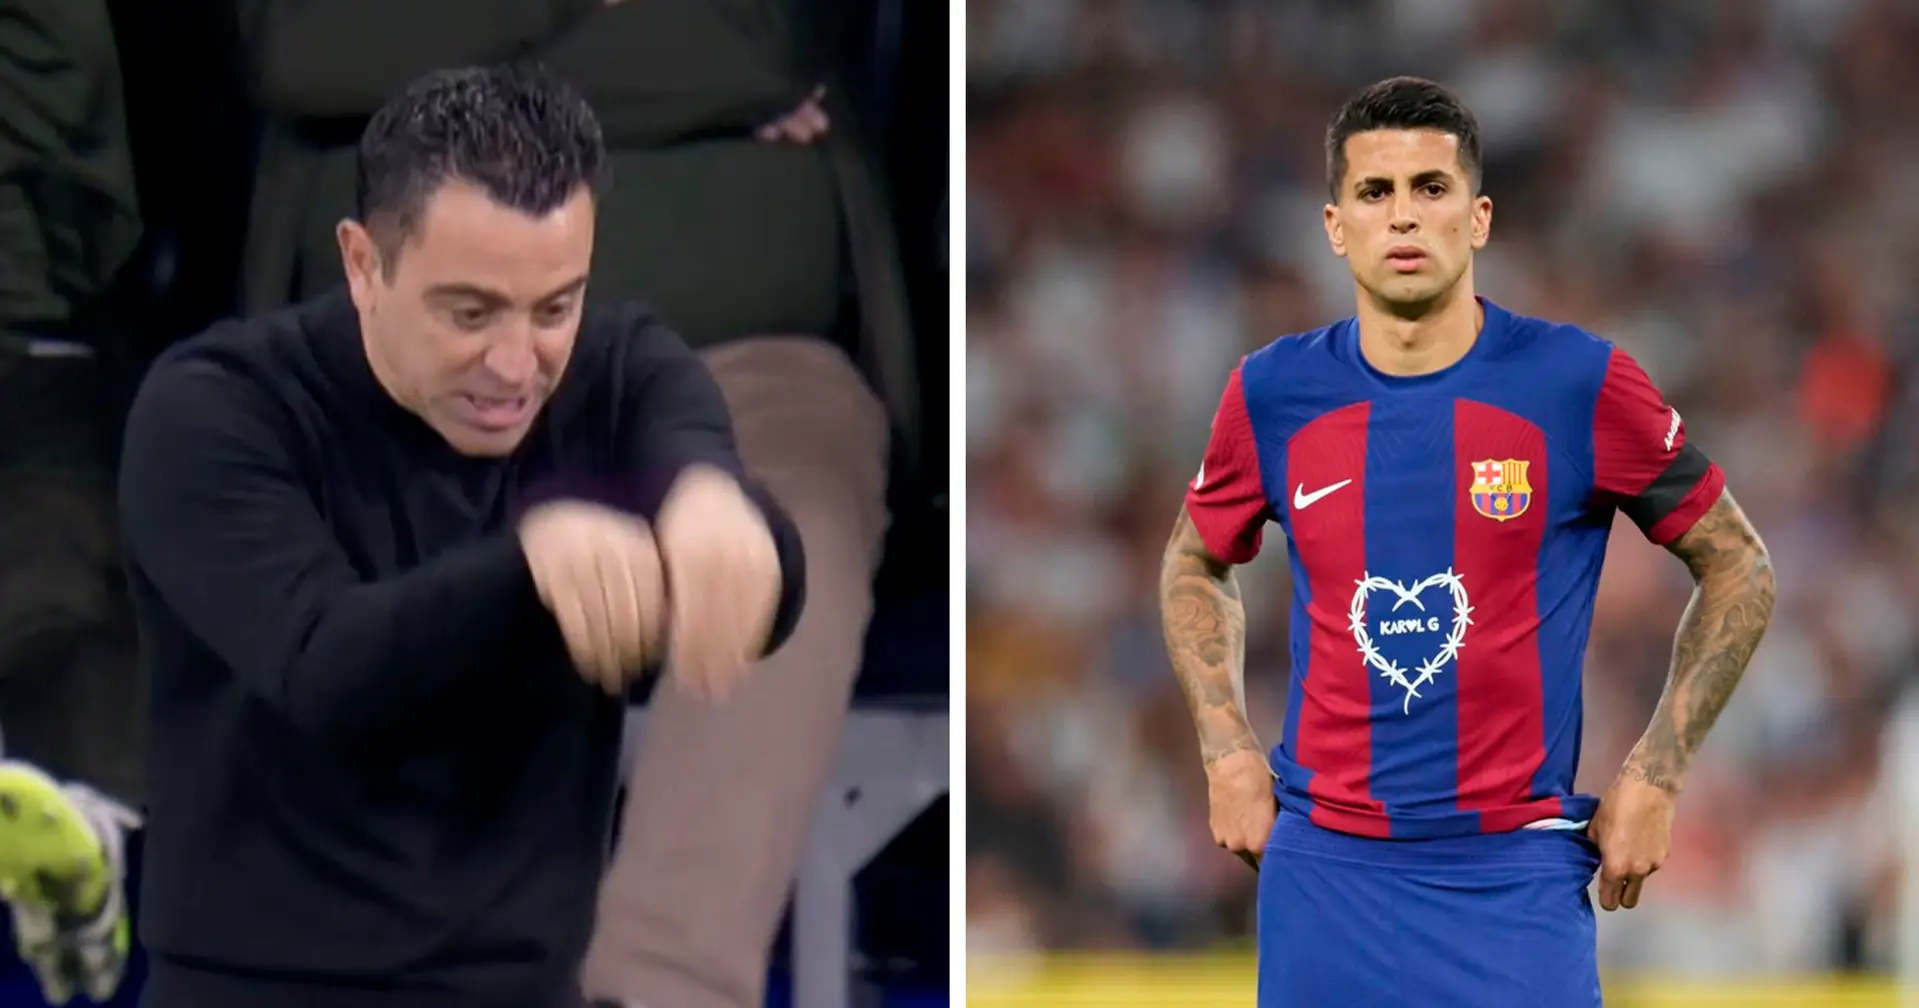 Fan explains what might be Barcelona's biggest problem on the pitch - not tactics